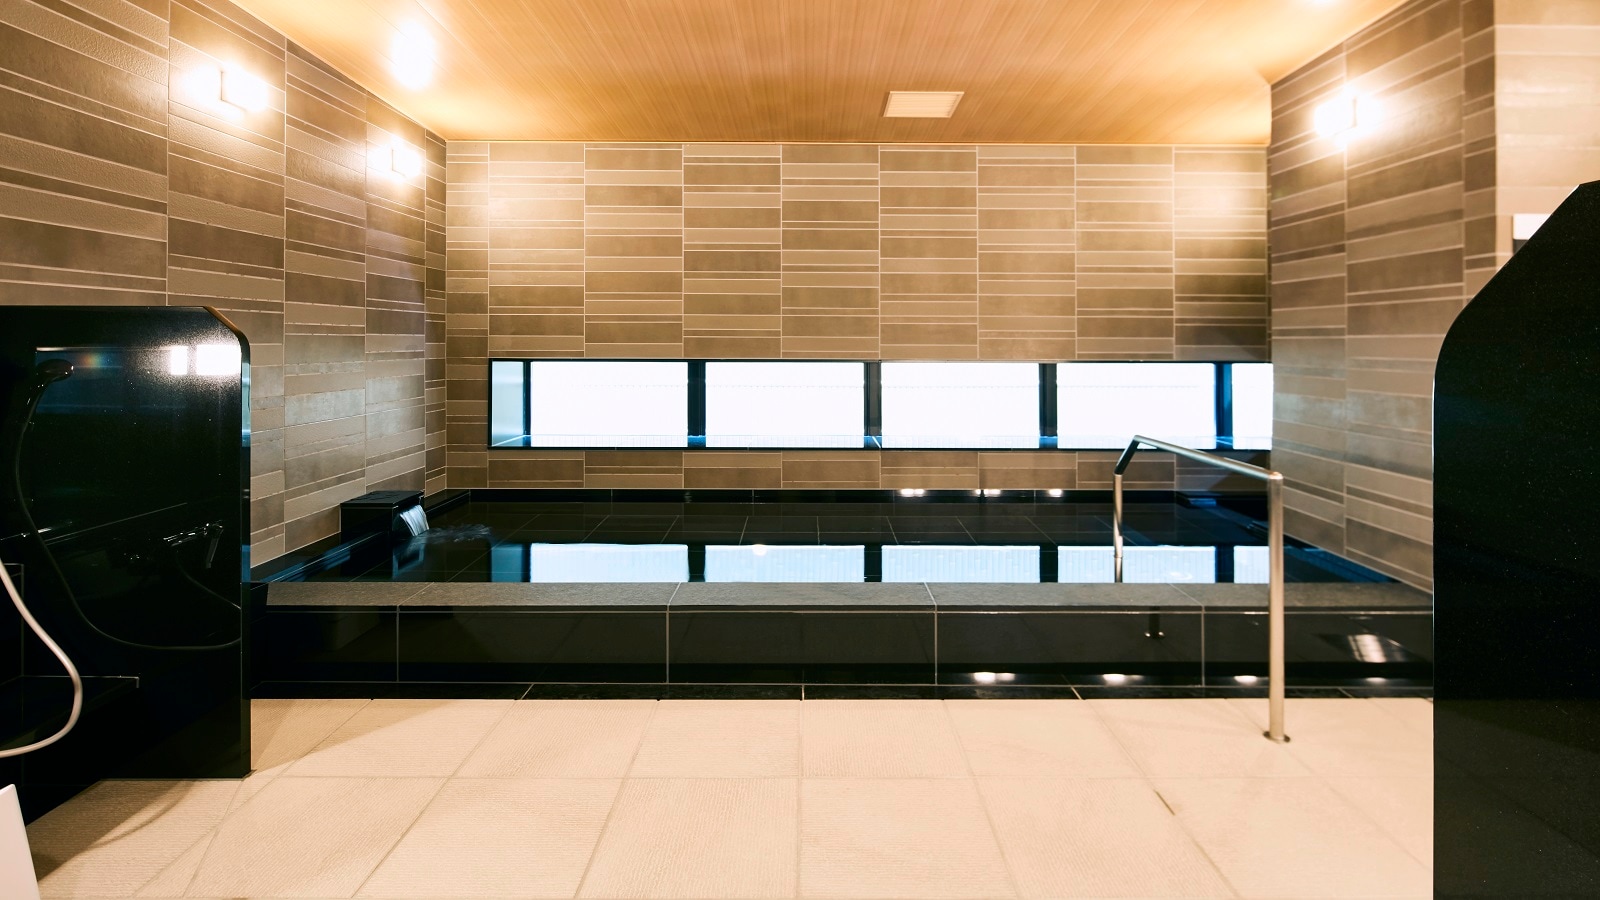 A large public bath to soothe away the fatigue of your trip